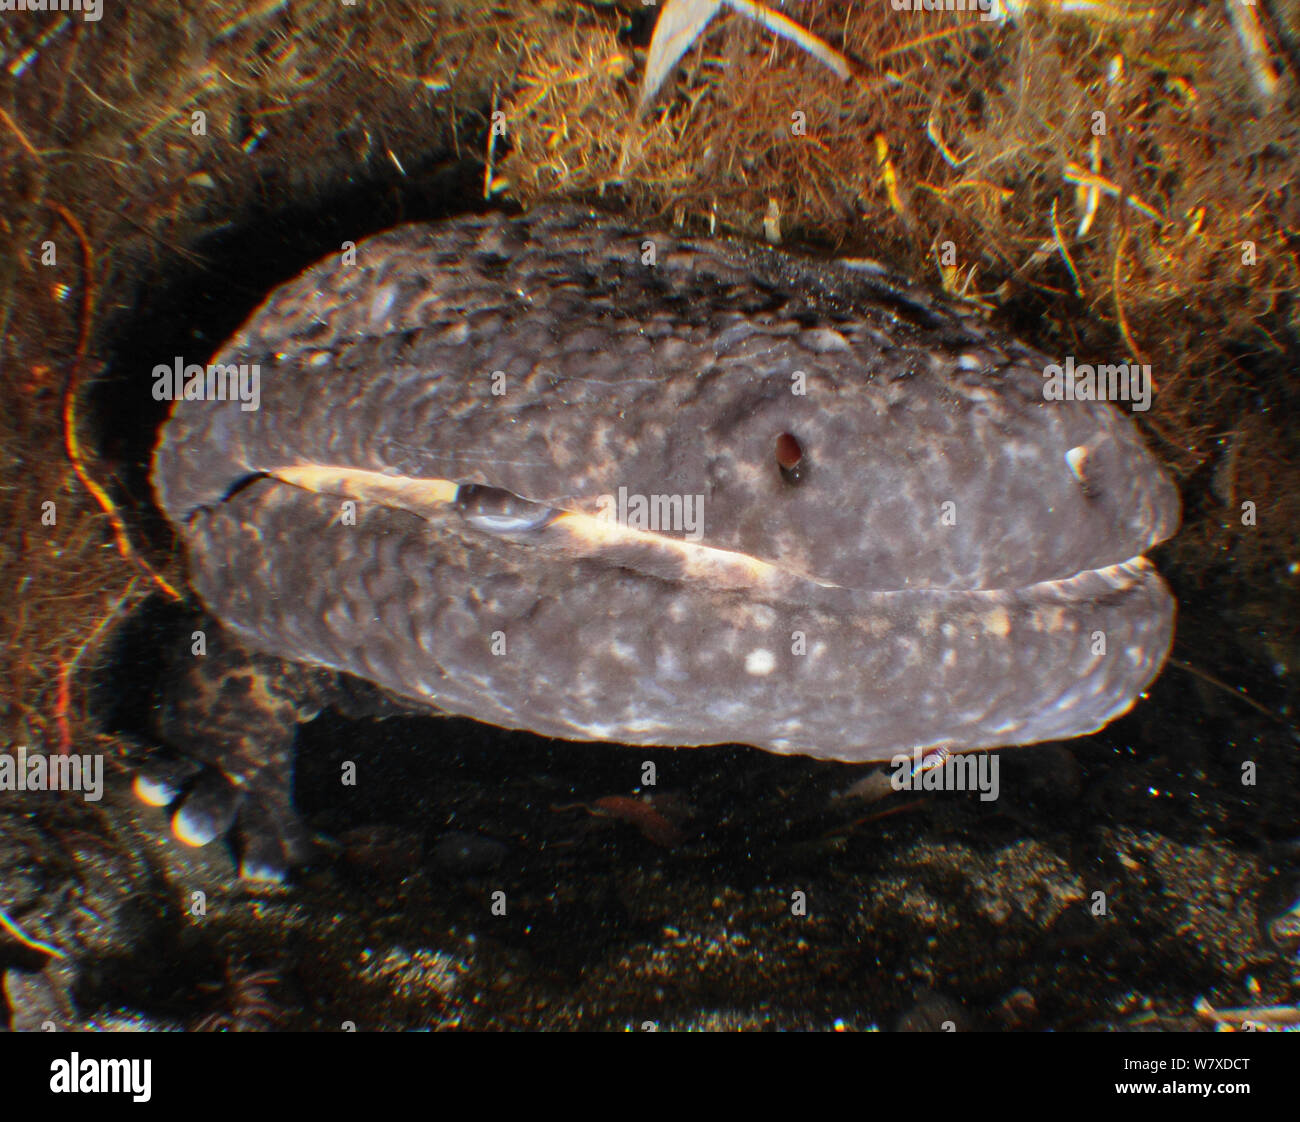 Japanese giant salamander (Andrias japonicus) male with own young in mouth. Hino river, Nichinan-chou, Tottori, Japan, March. Stock Photo